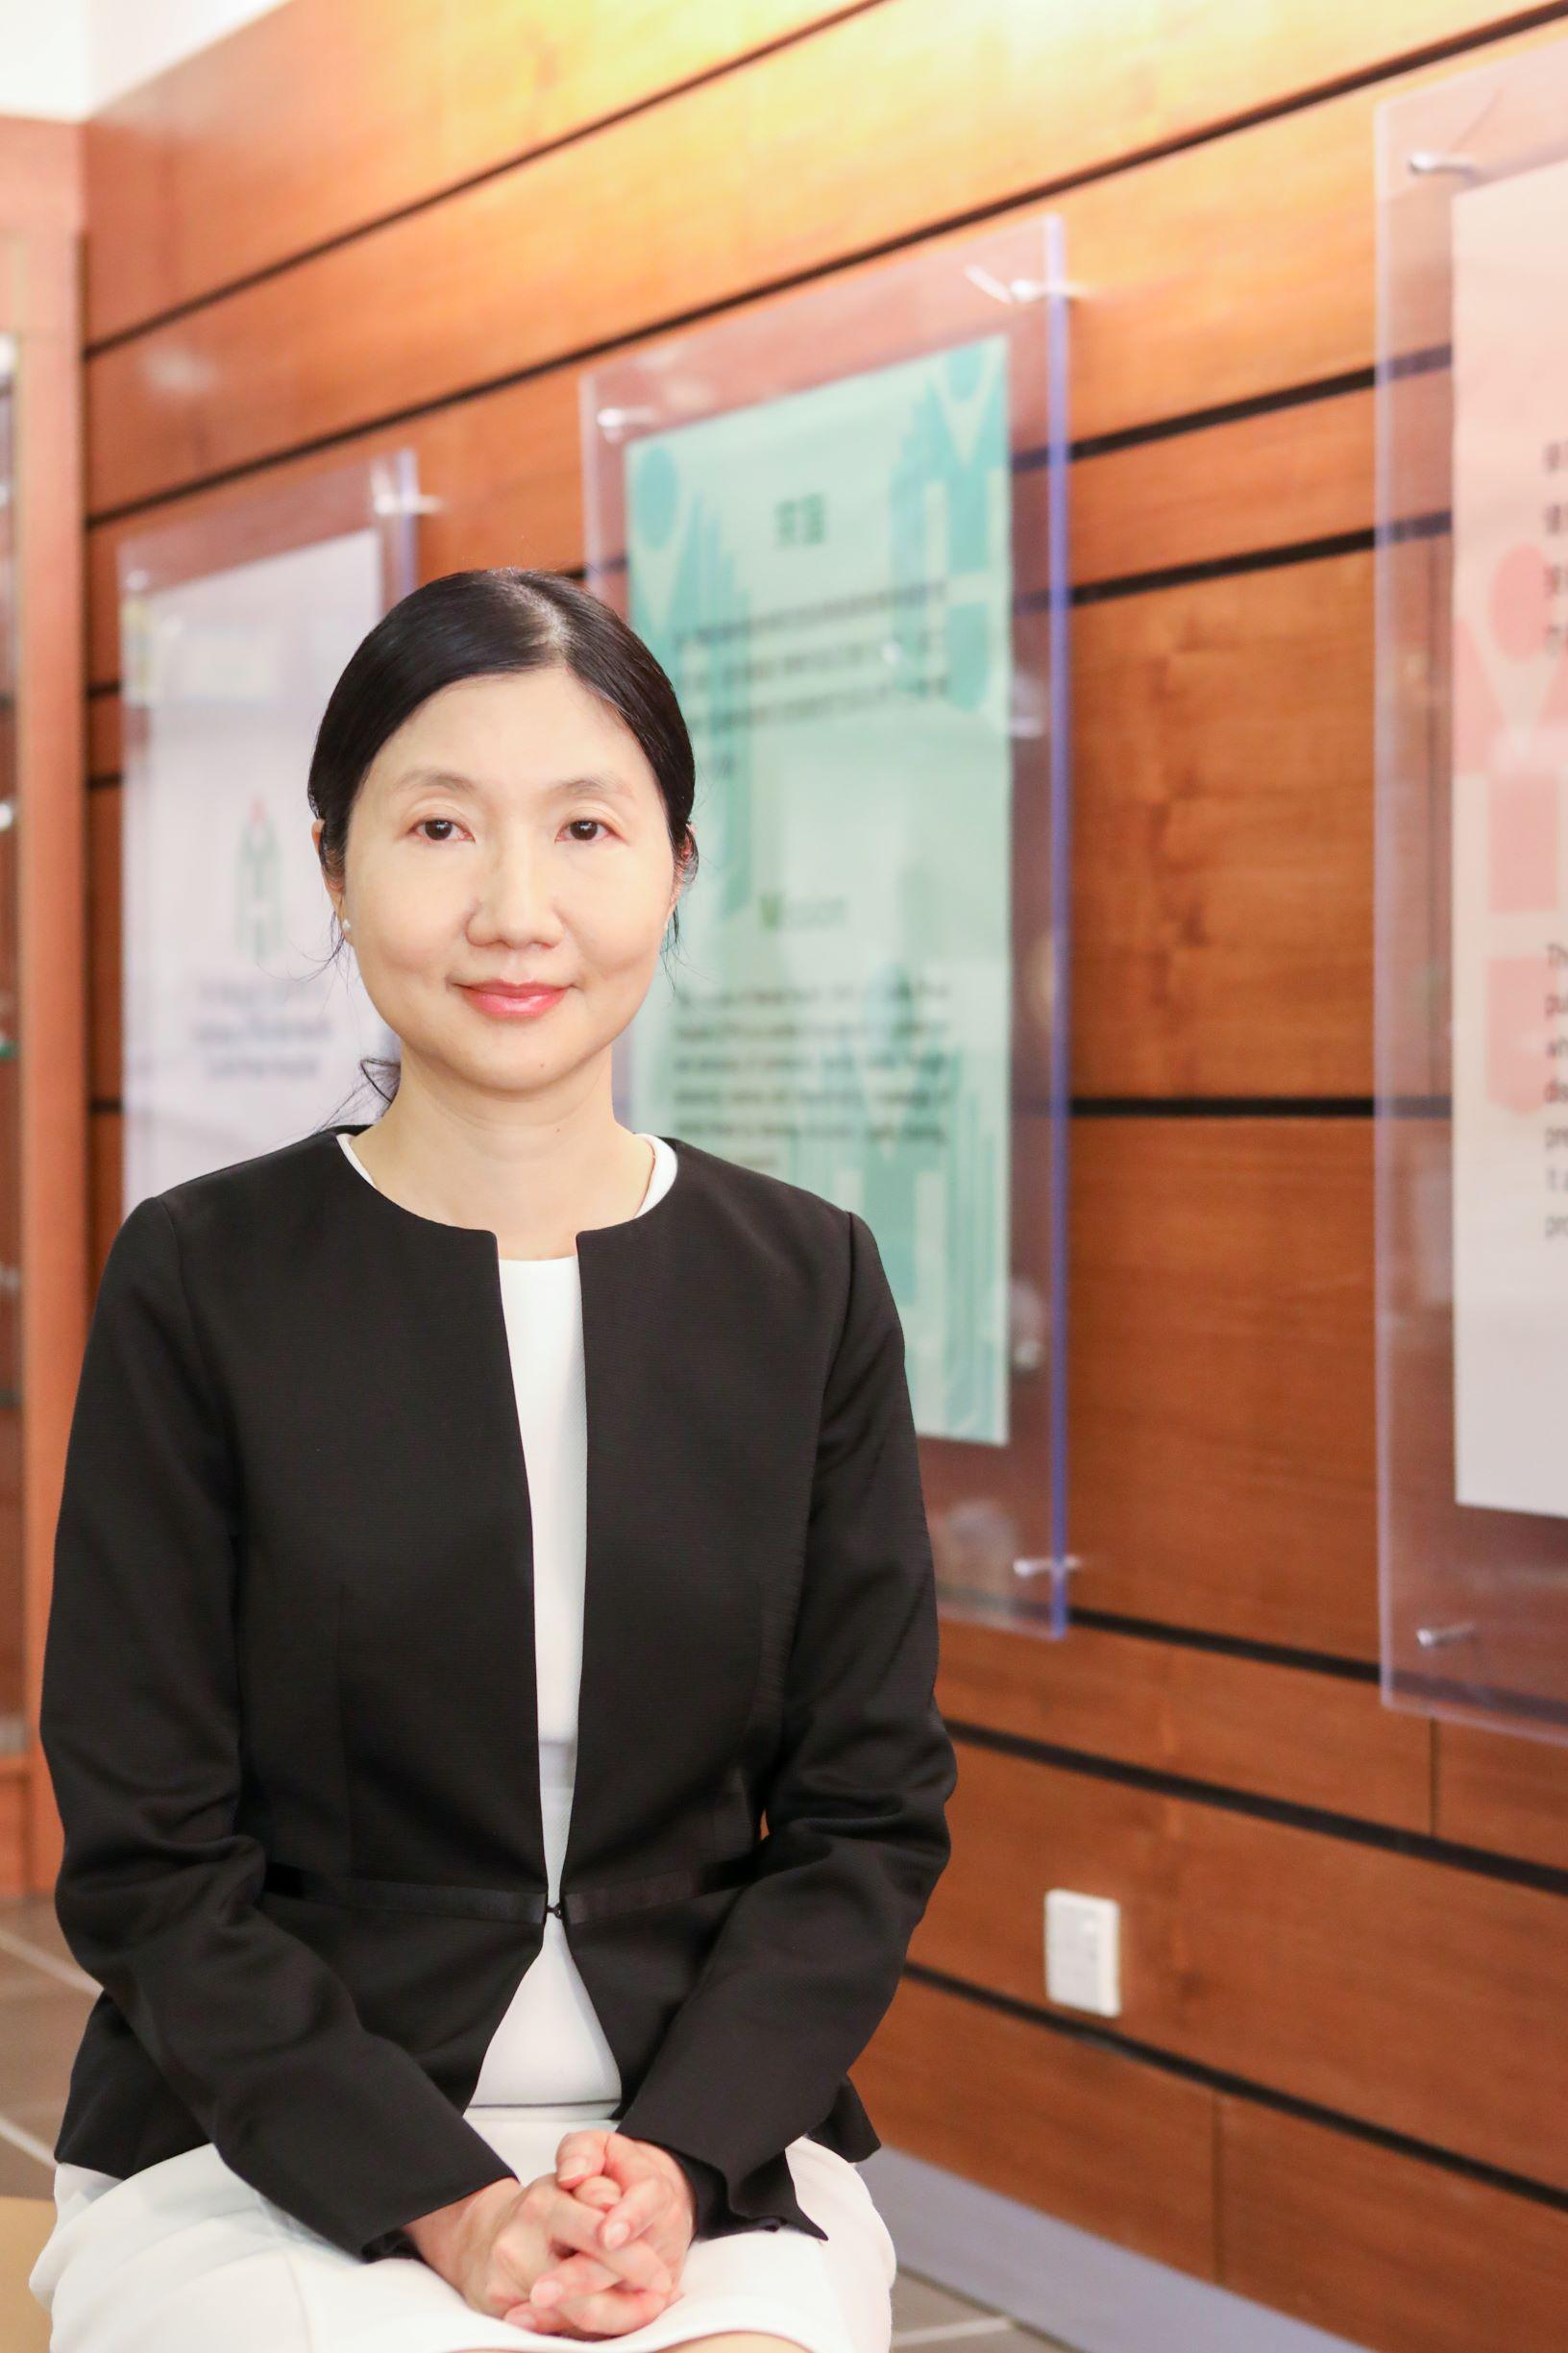 The Hospital Authority announced today (March 23) that Dr Bonnie Siu will be appointed as Hospital Chief Executive of Castle Peak Hospital and Siu Lam Hospital with effect from June 1.